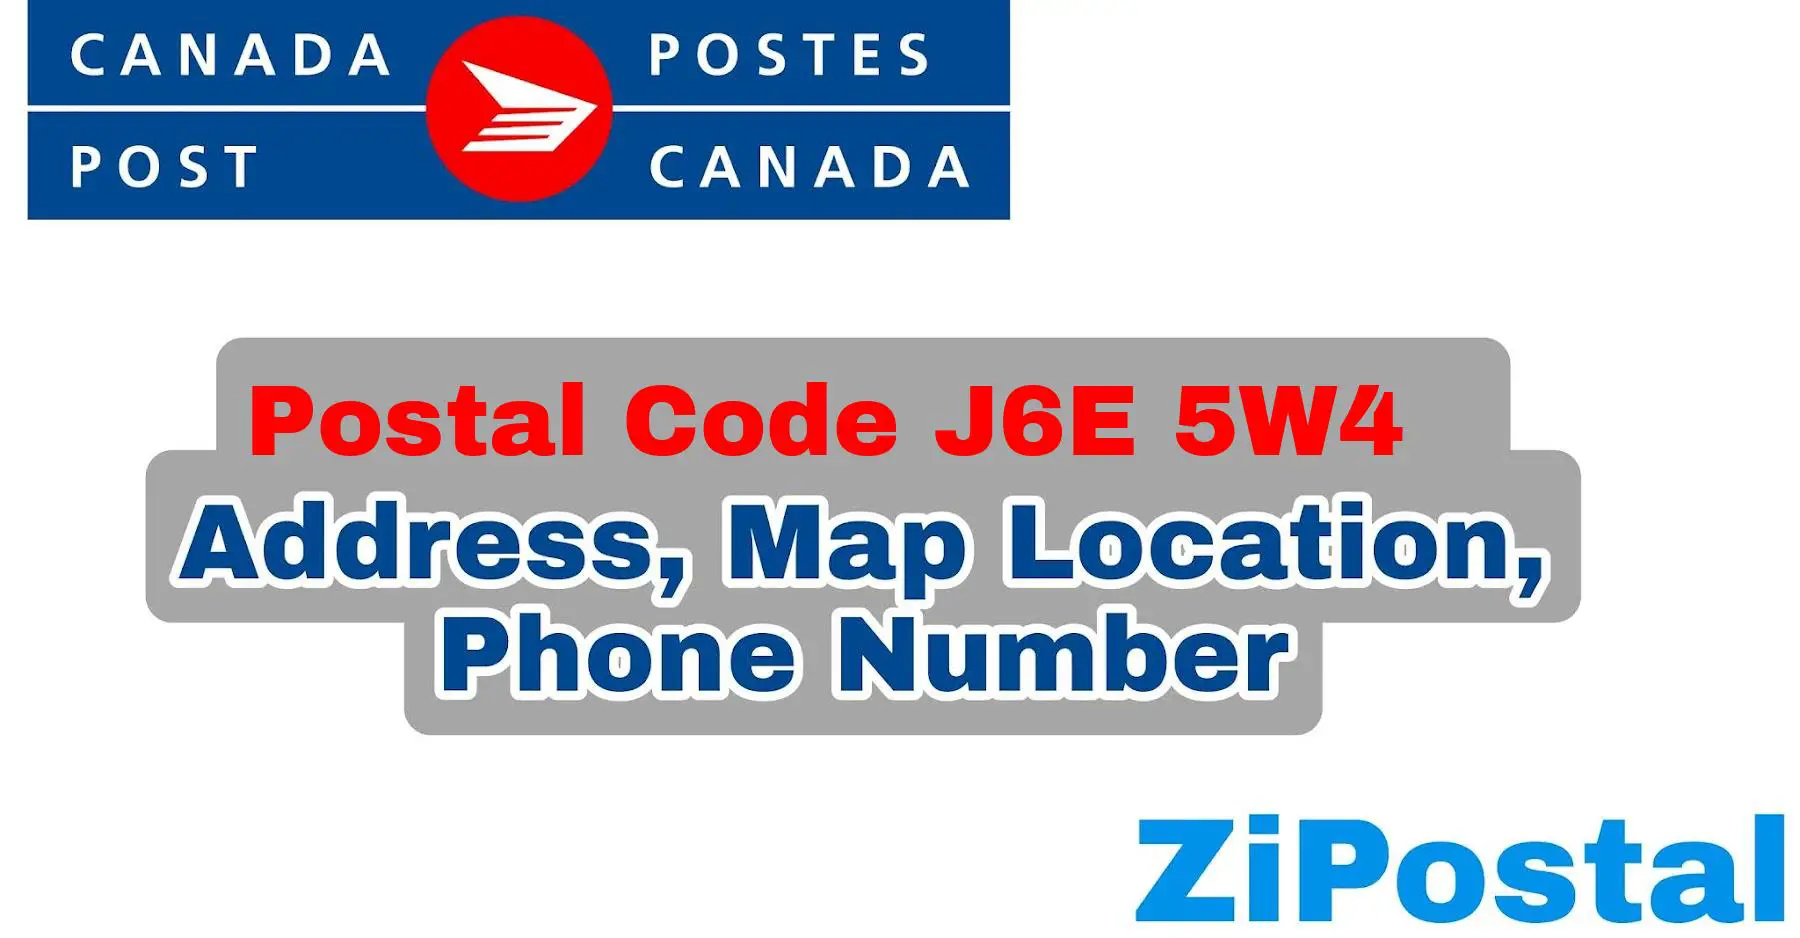 Postal Code J6E 5W4 Address Map Location and Phone Number